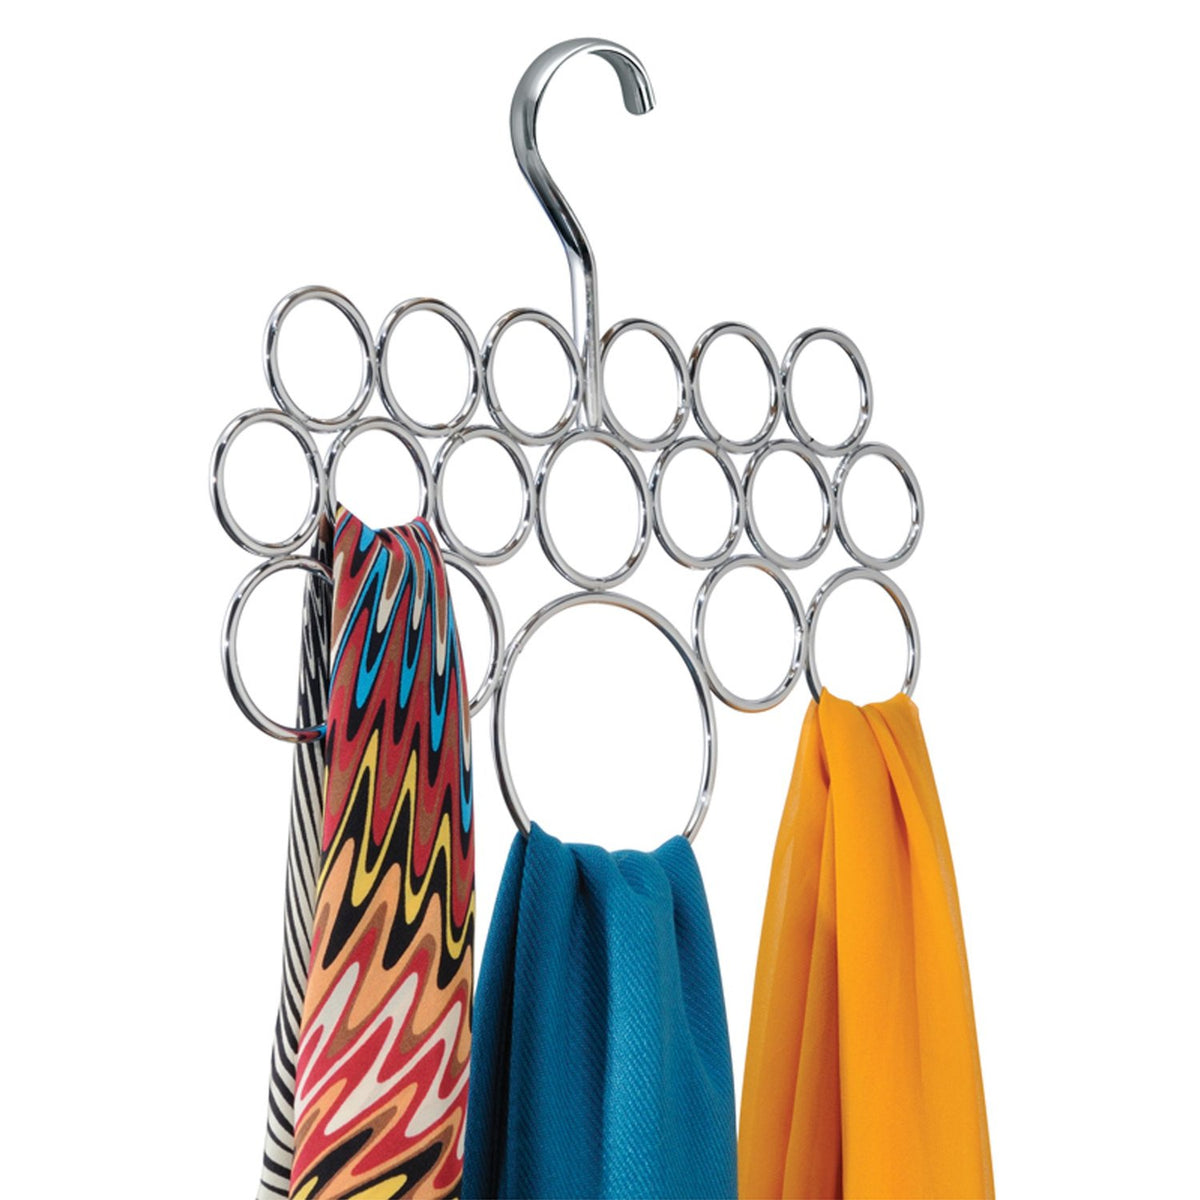 buy hangers at cheap rate in bulk. wholesale & retail laundry storage & organizers store.